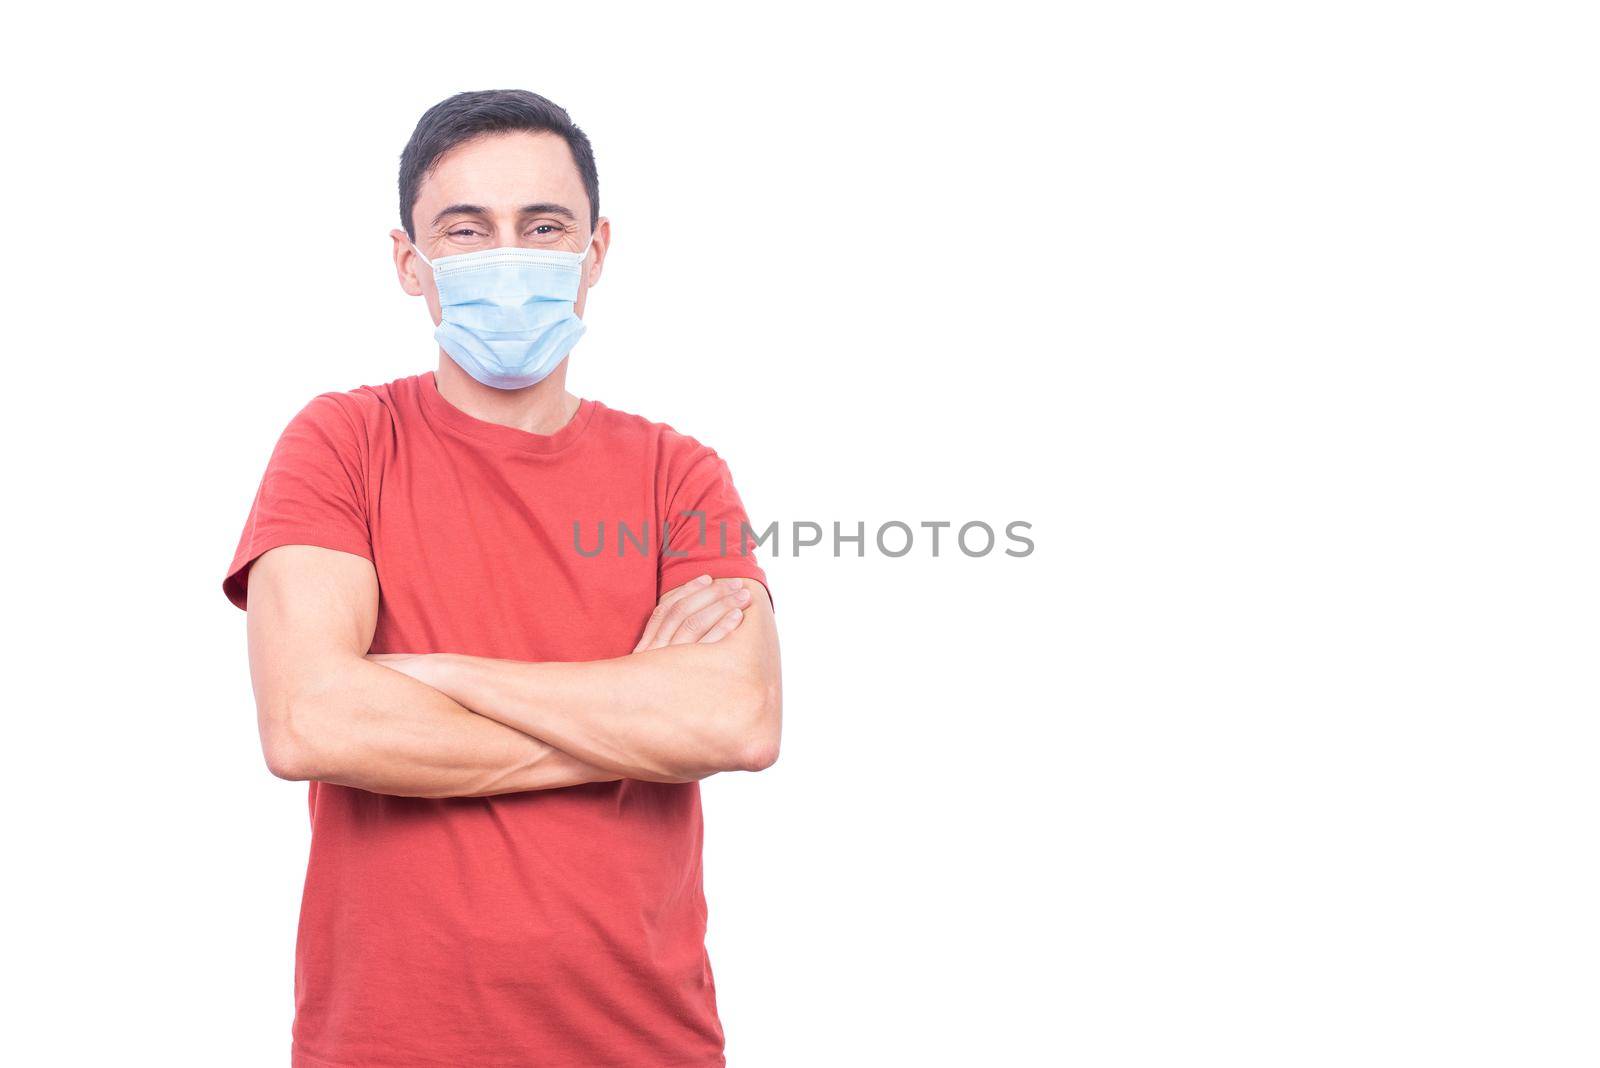 Optimistic male in protective mask looking at camera with crossed arms while standing isolated on white background in light studio